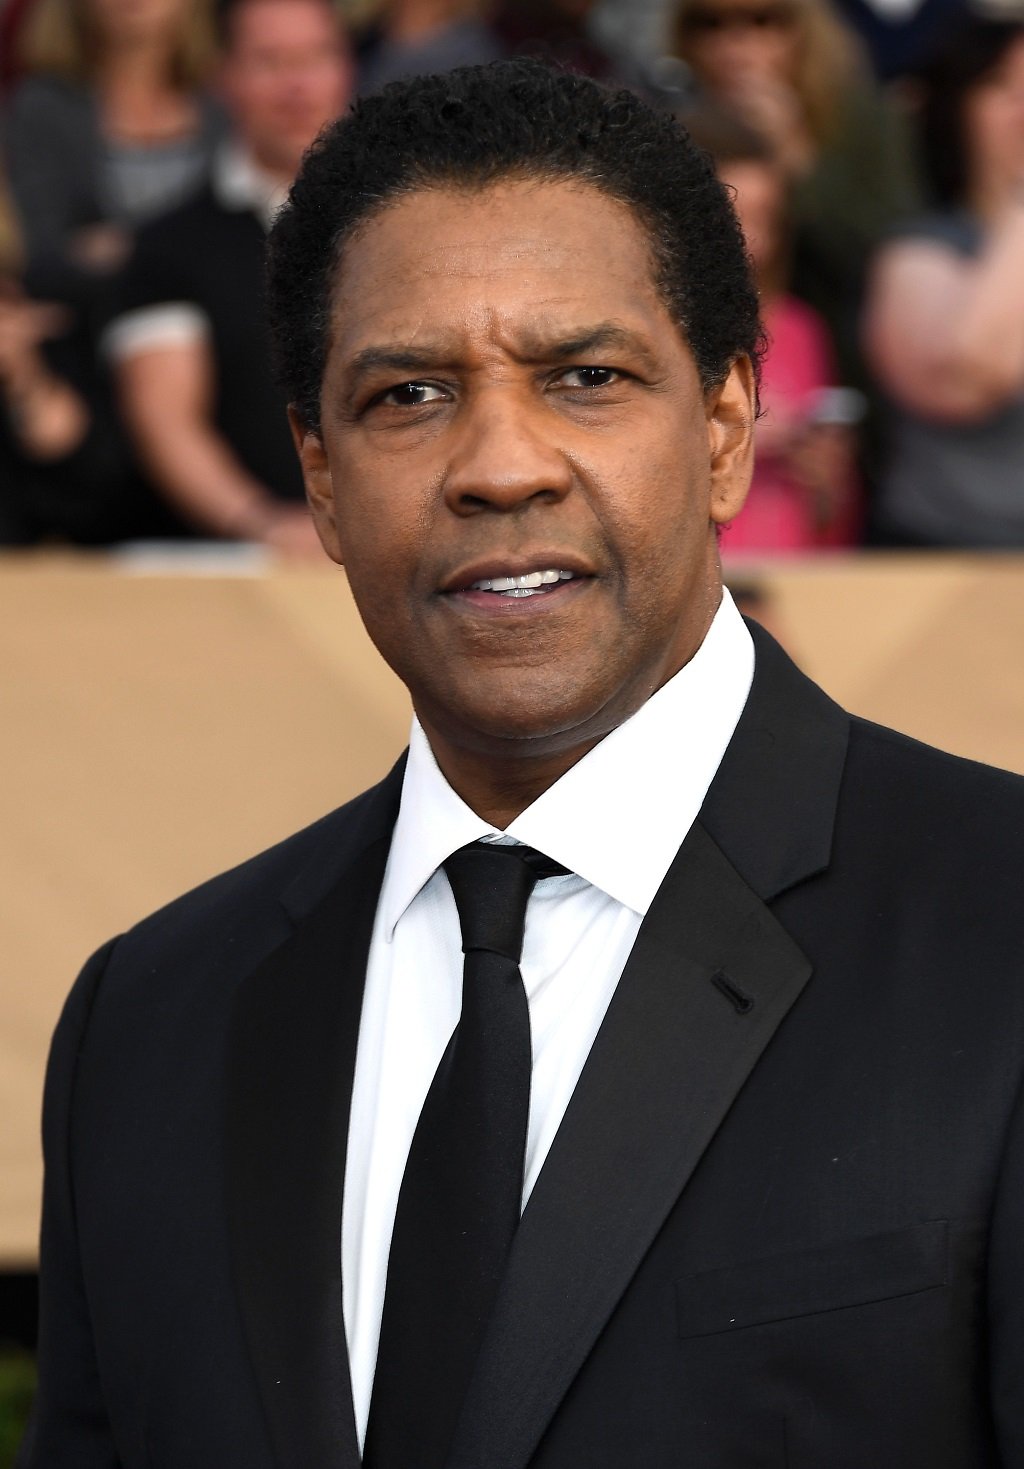 Denzel Washington at the 23rd Annual Screen Actors Guild Awards at The Shrine Auditorium on January 29, 2017, in Los Angeles, California | Source: Getty Images